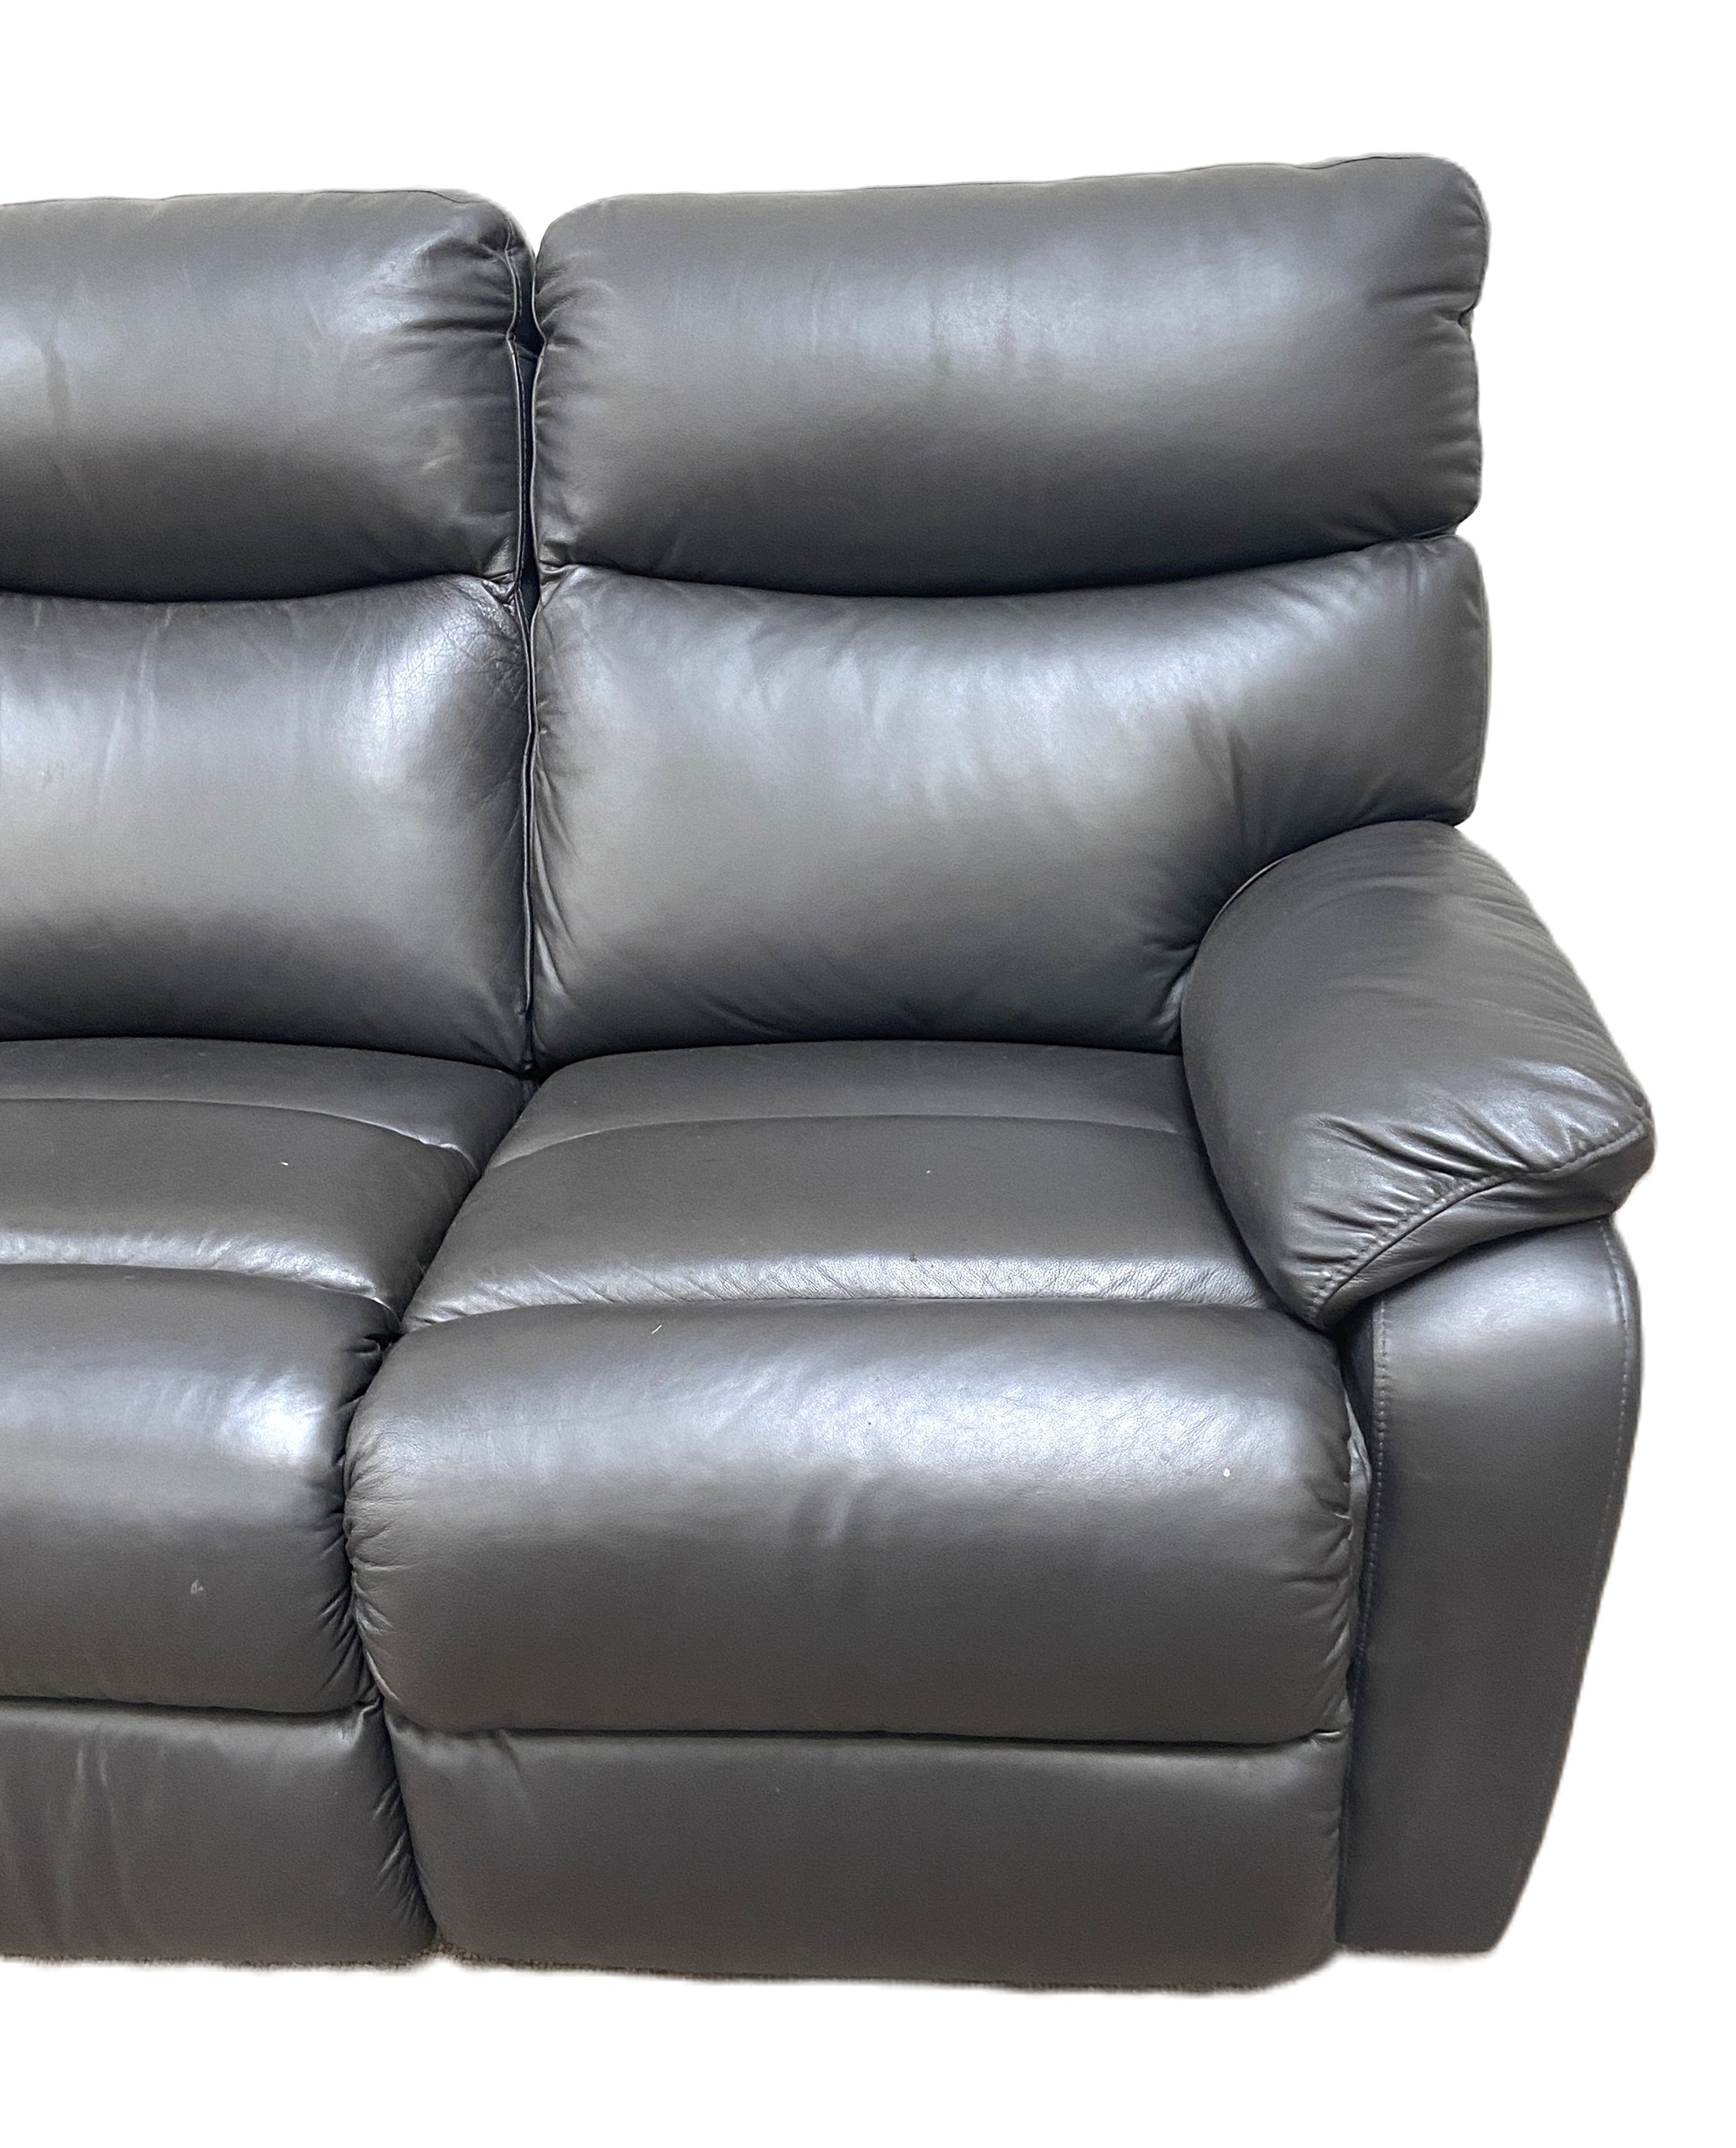 A modern three seat black leather reclining sofa, with two adjustable foot rests - Image 2 of 7